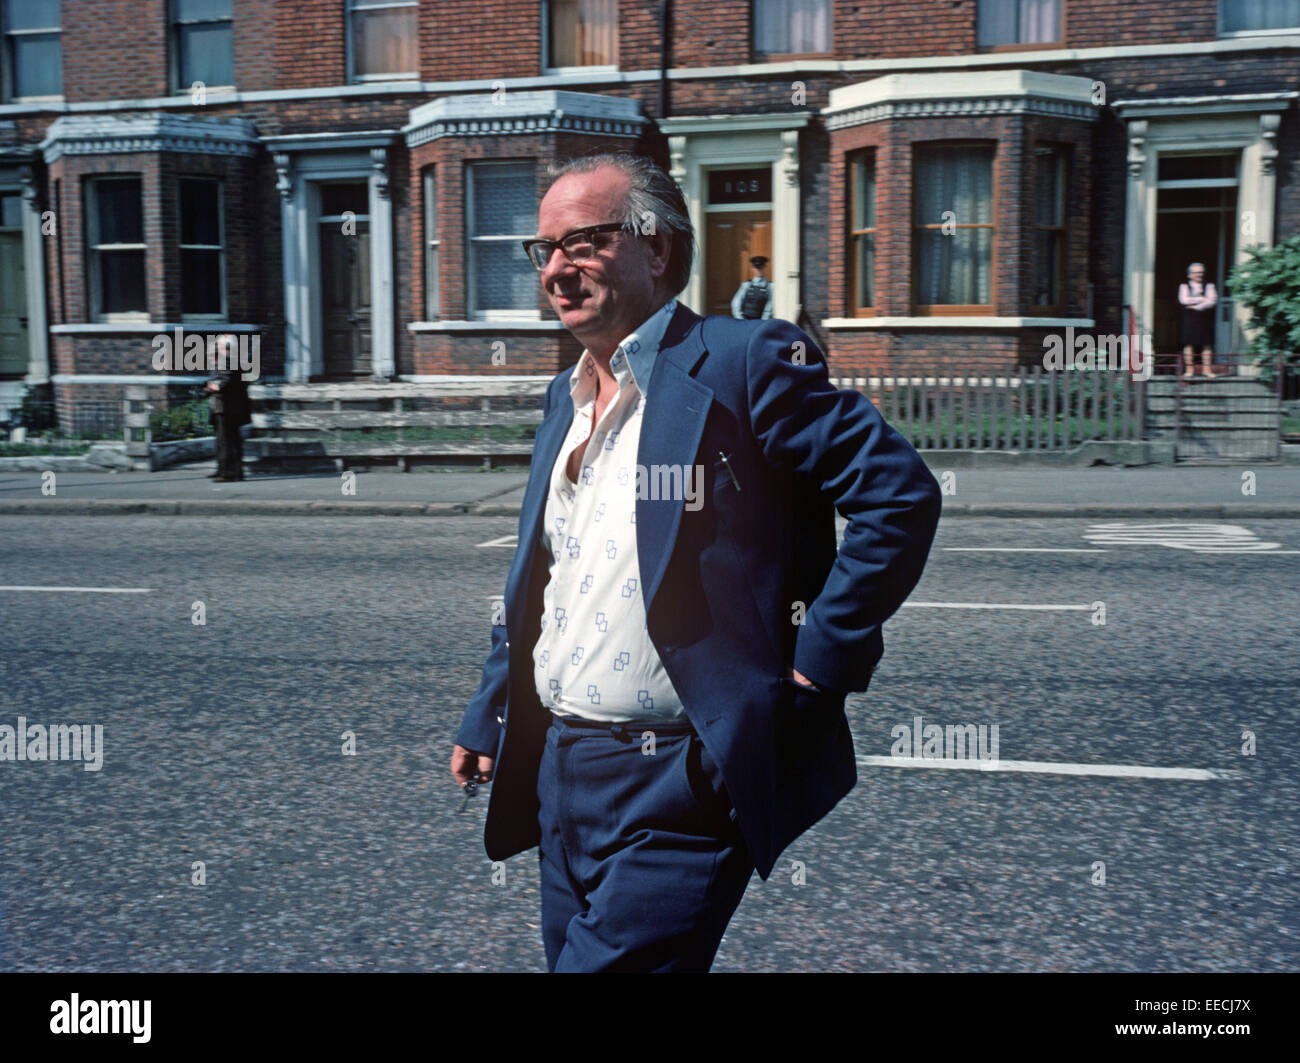 BELFAST, NORTHERN IRELAND, AUGUST 1976. Gerry Fitt, Socialist Democratic and Labour Party Member of Parliament for West Belfast during The Troubles, Northern Ireland. Stock Photo